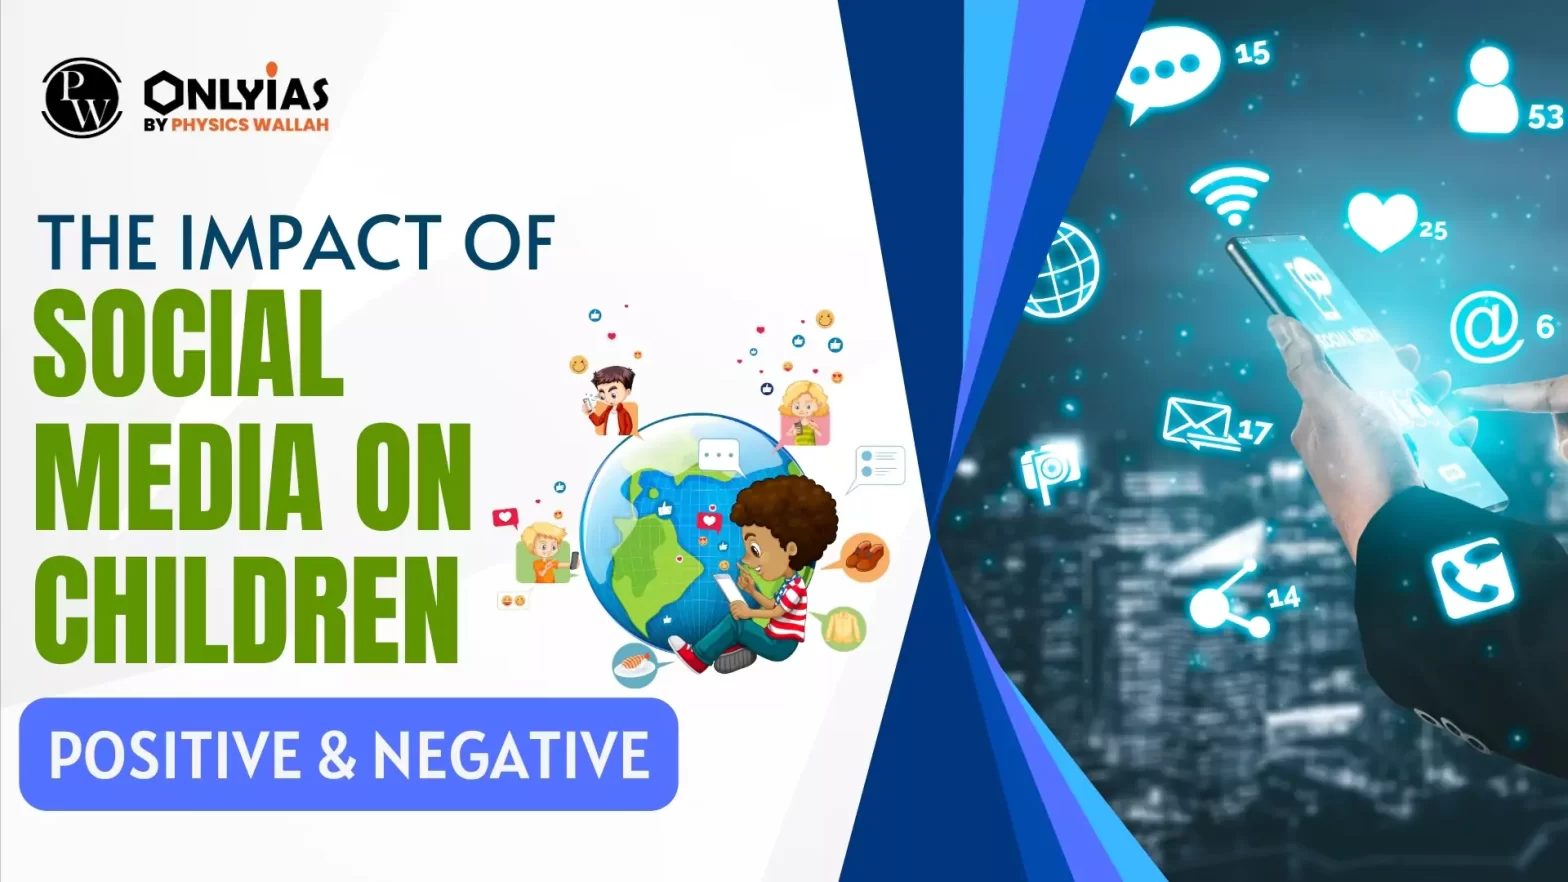 The Impacts Of Social Media On Children: Positive & Negative